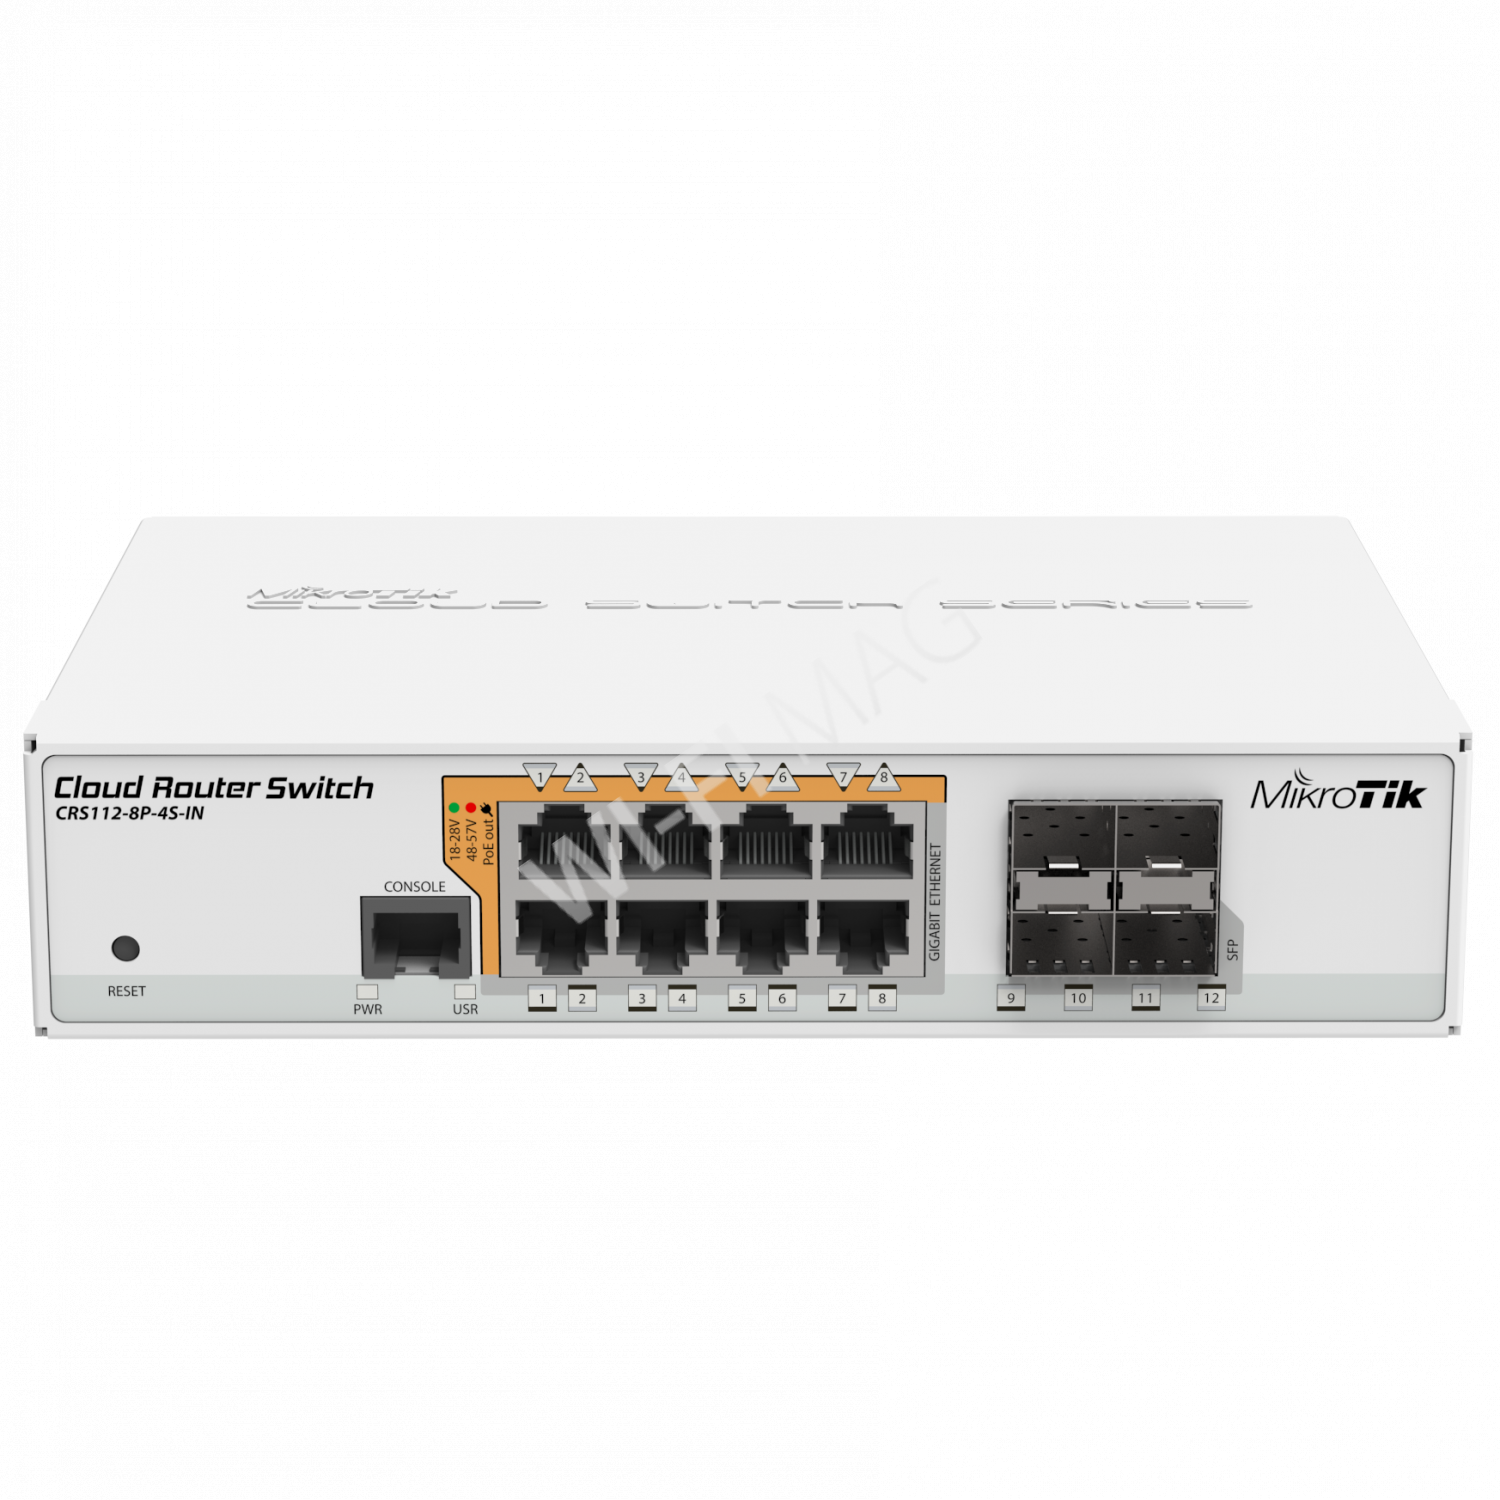 Mikrotik Cloud Router Switch CRS112-8P-4S-IN, коммутатор с функциями маршрутизатора